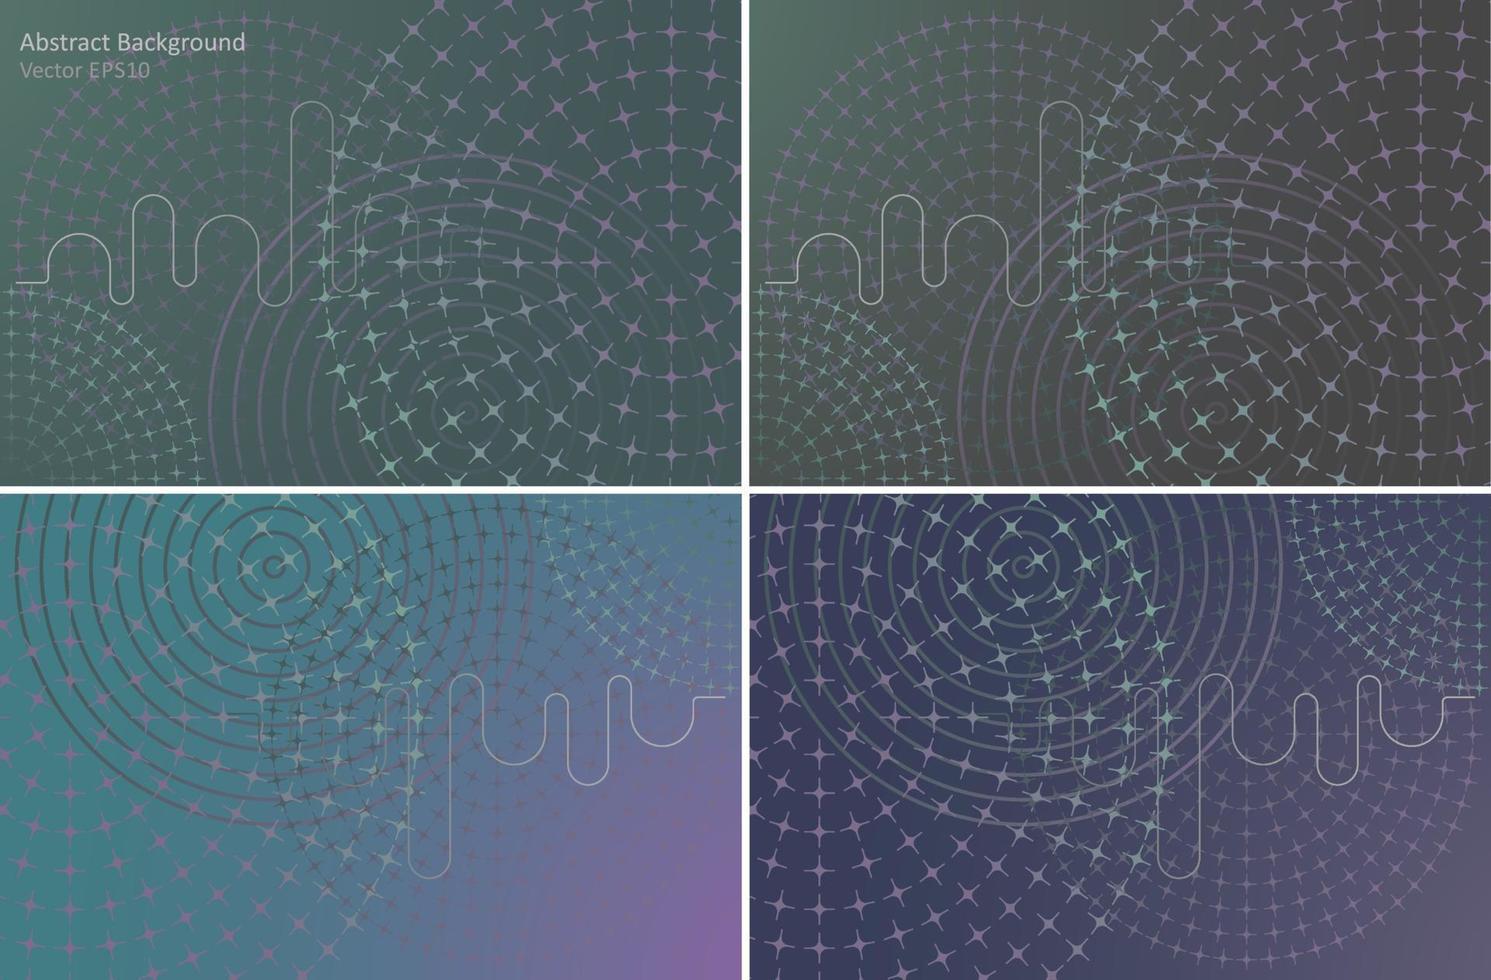 Abstract Vector Backgrounds